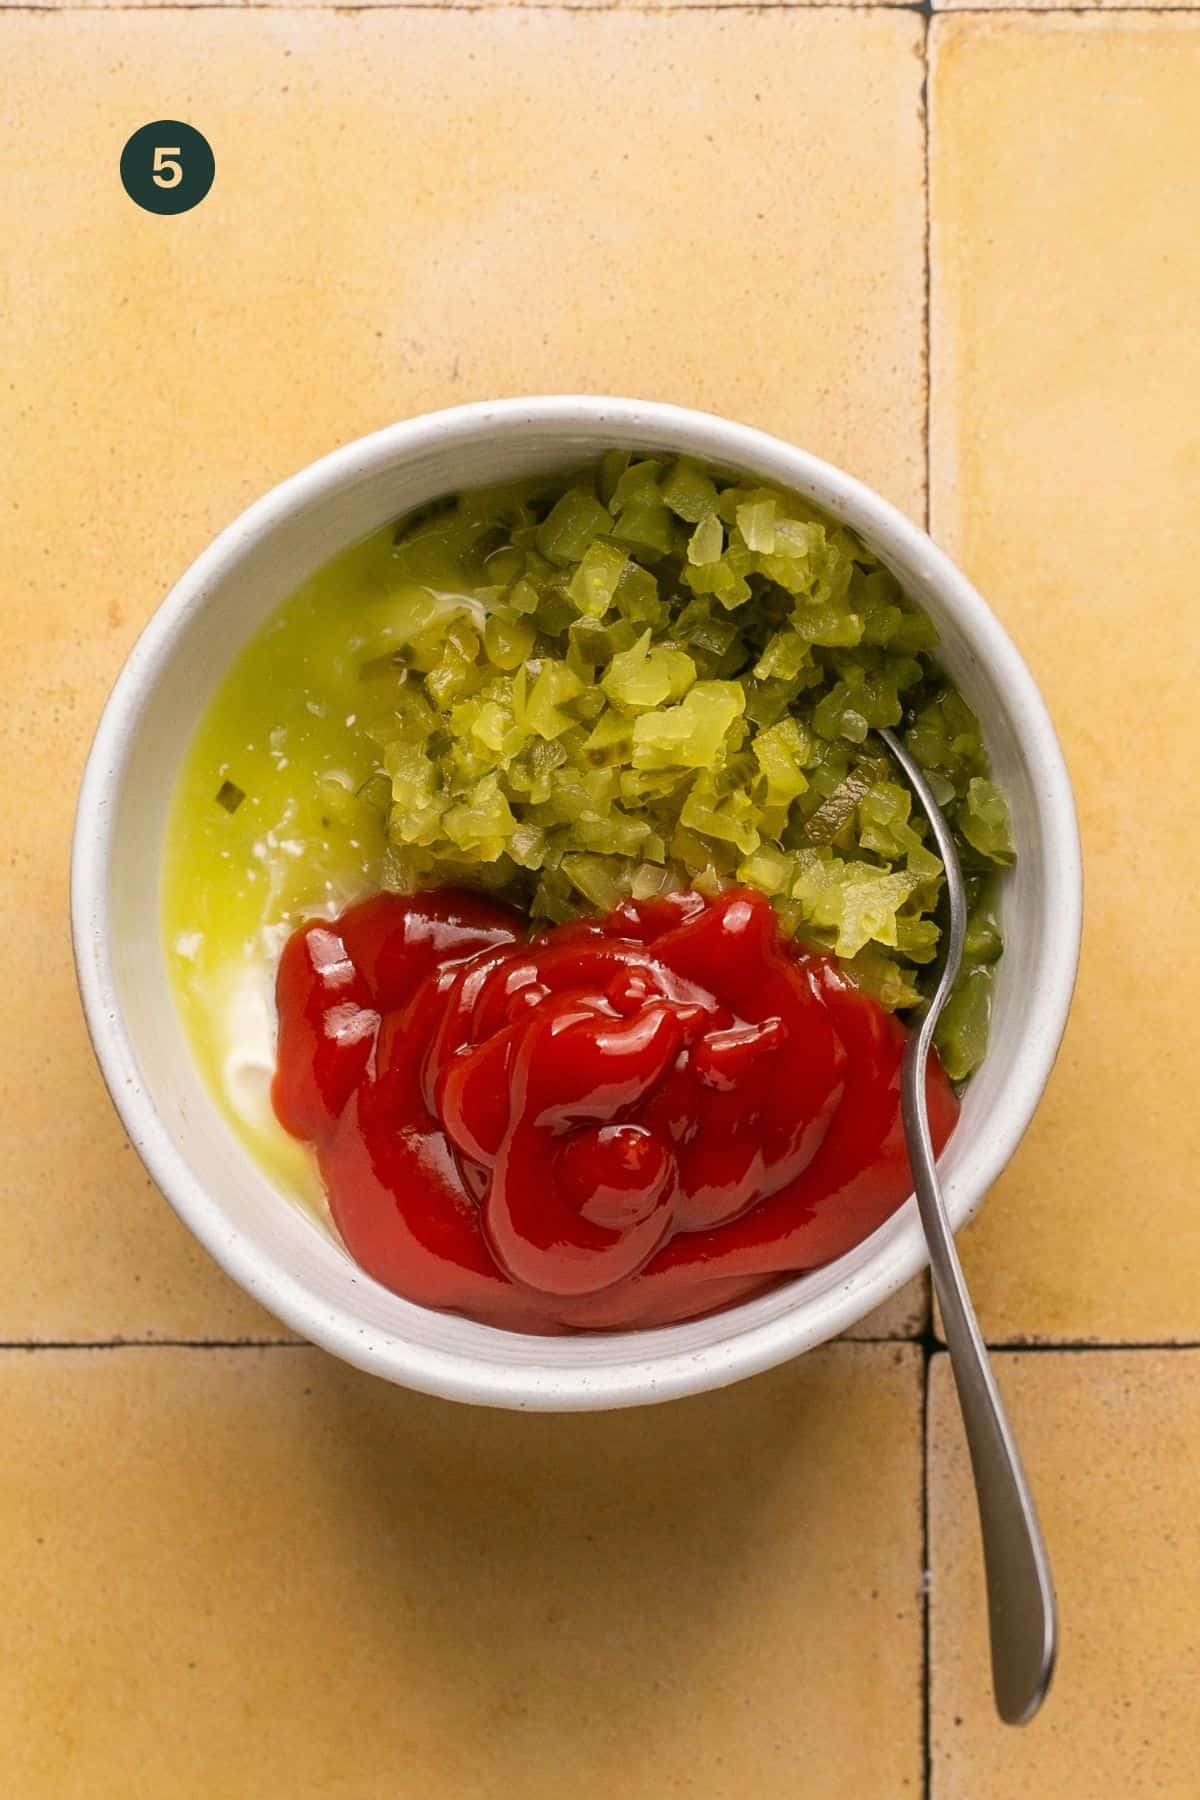 Chopped pickles, pickle juice, mayonnaise and ketchup in a small bowl.